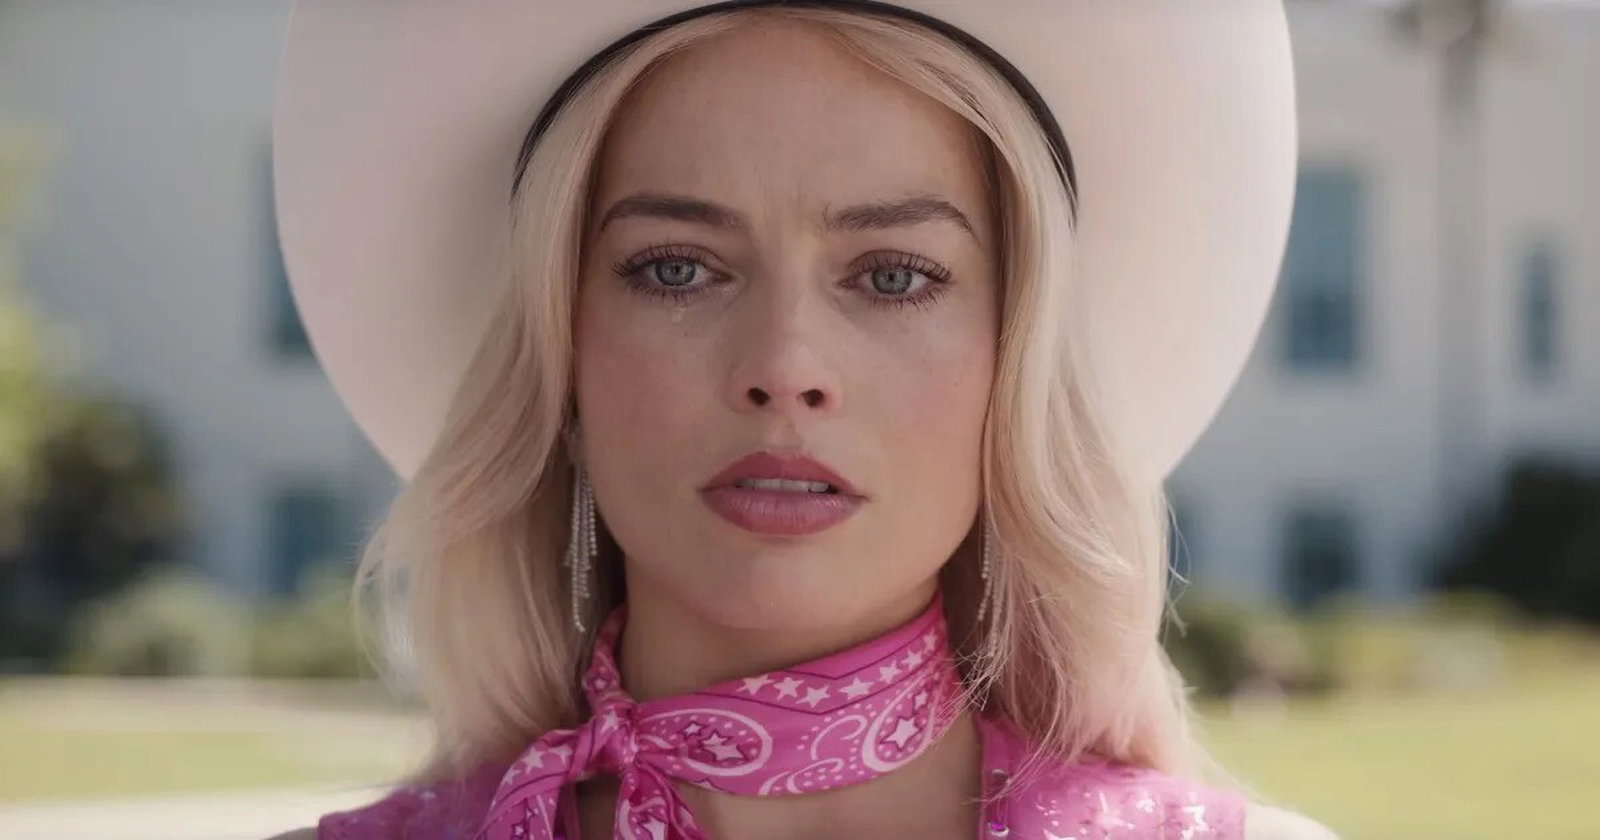 Margot Robbie in character as Barbie, crying.